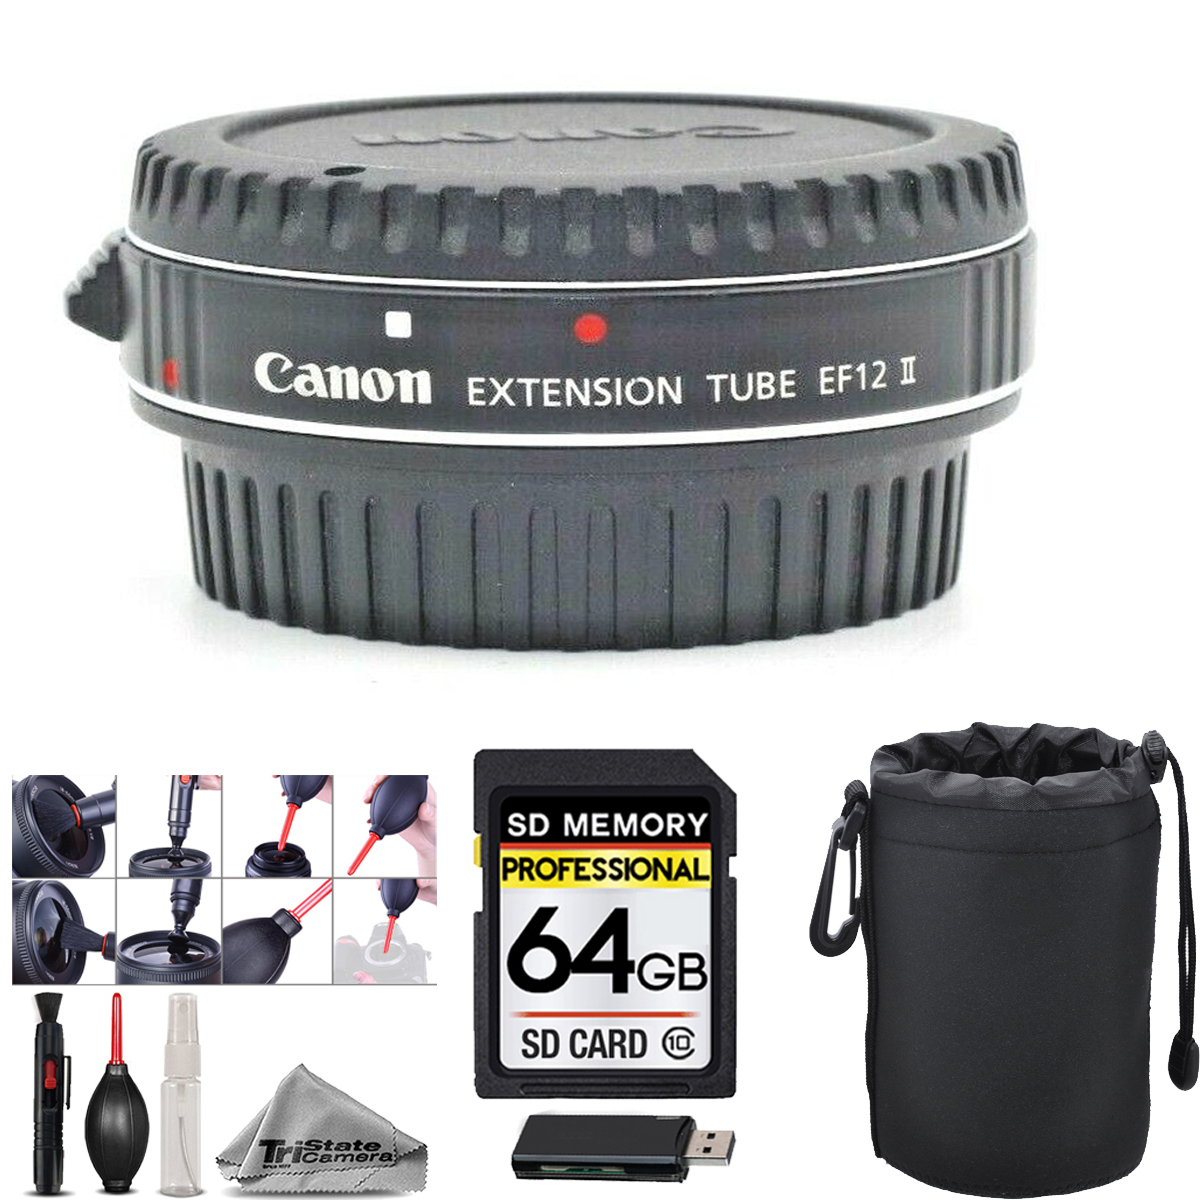 Extension Tube EF 12 II + Lens Pouch + Cleaning Kit + Card Reader + 64GB *FREE SHIPPING*